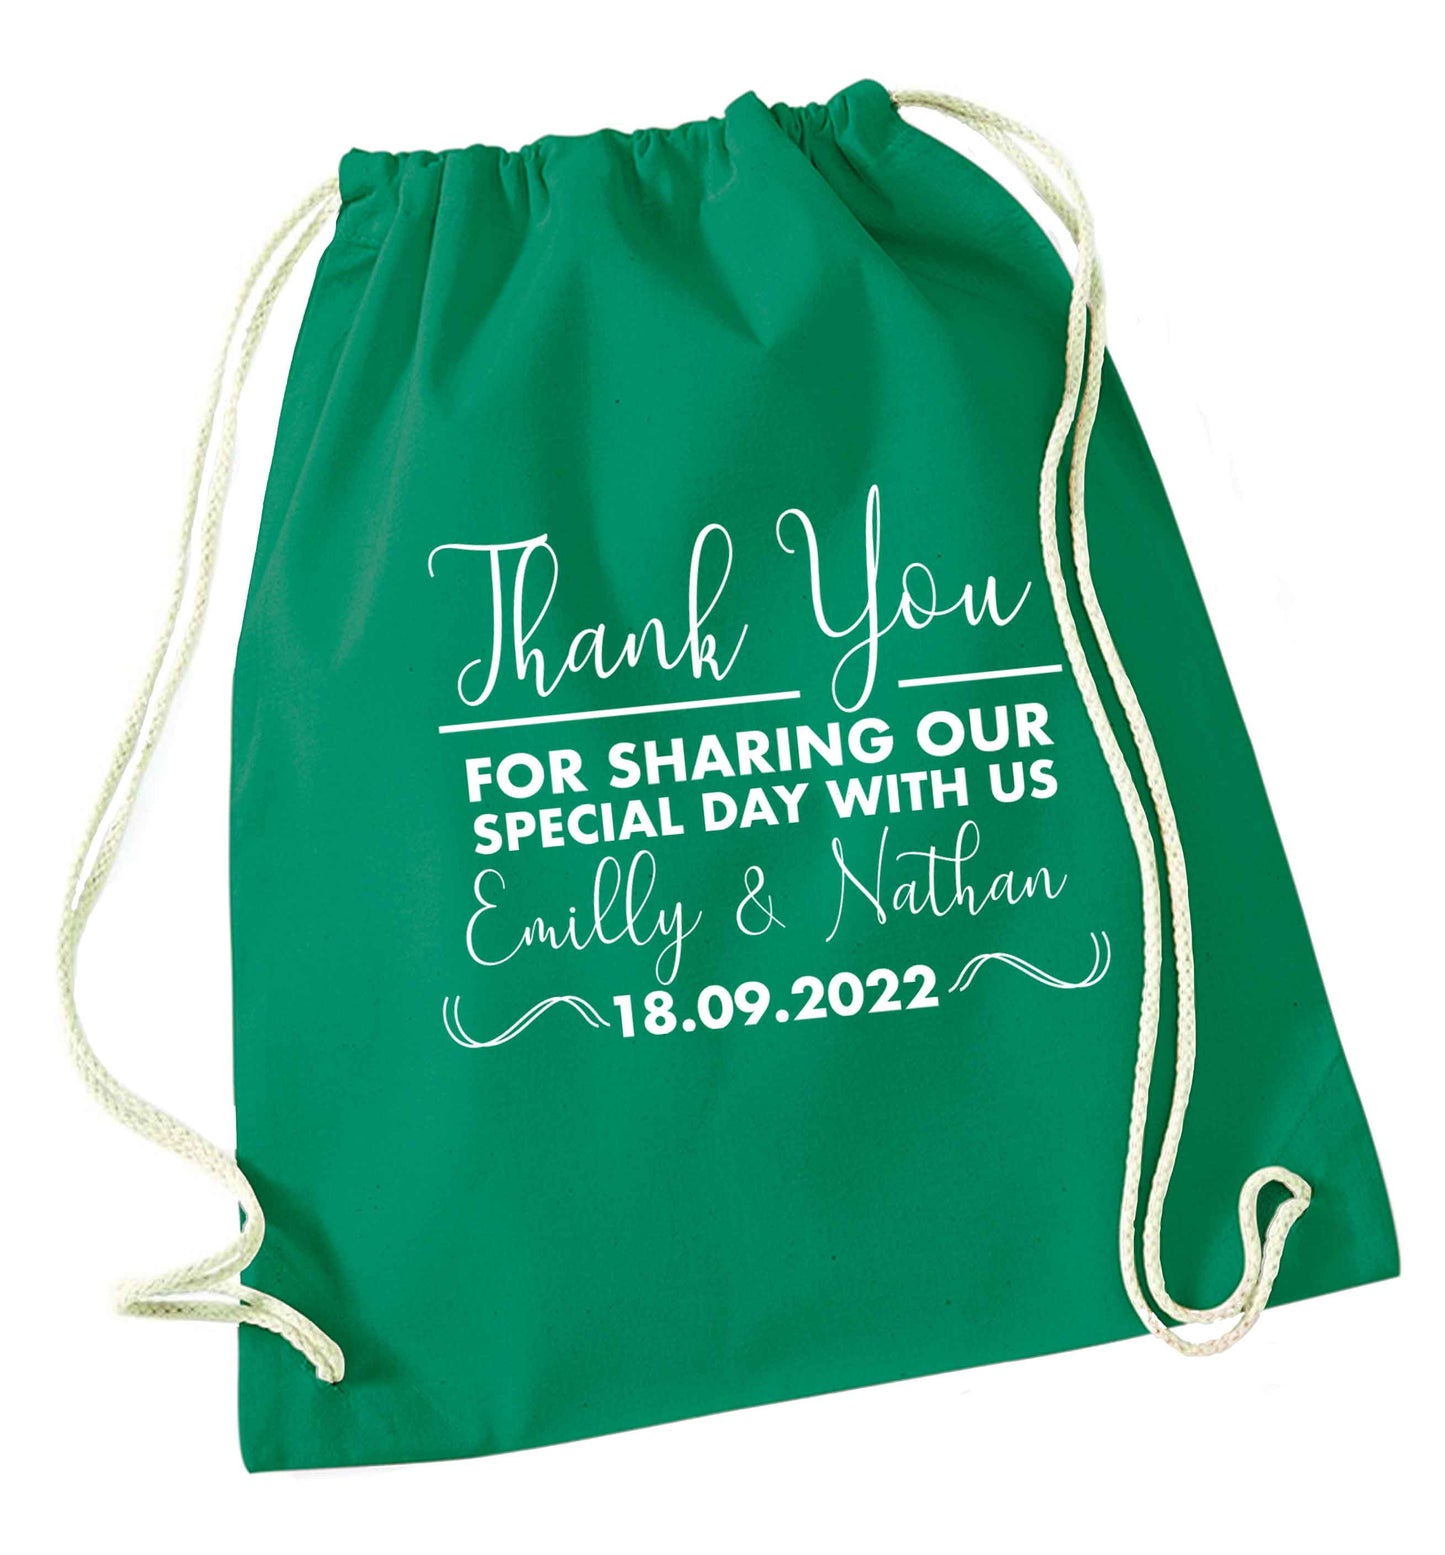 Gorgeous personalised and customisable wedding favour gifts! green drawstring bag